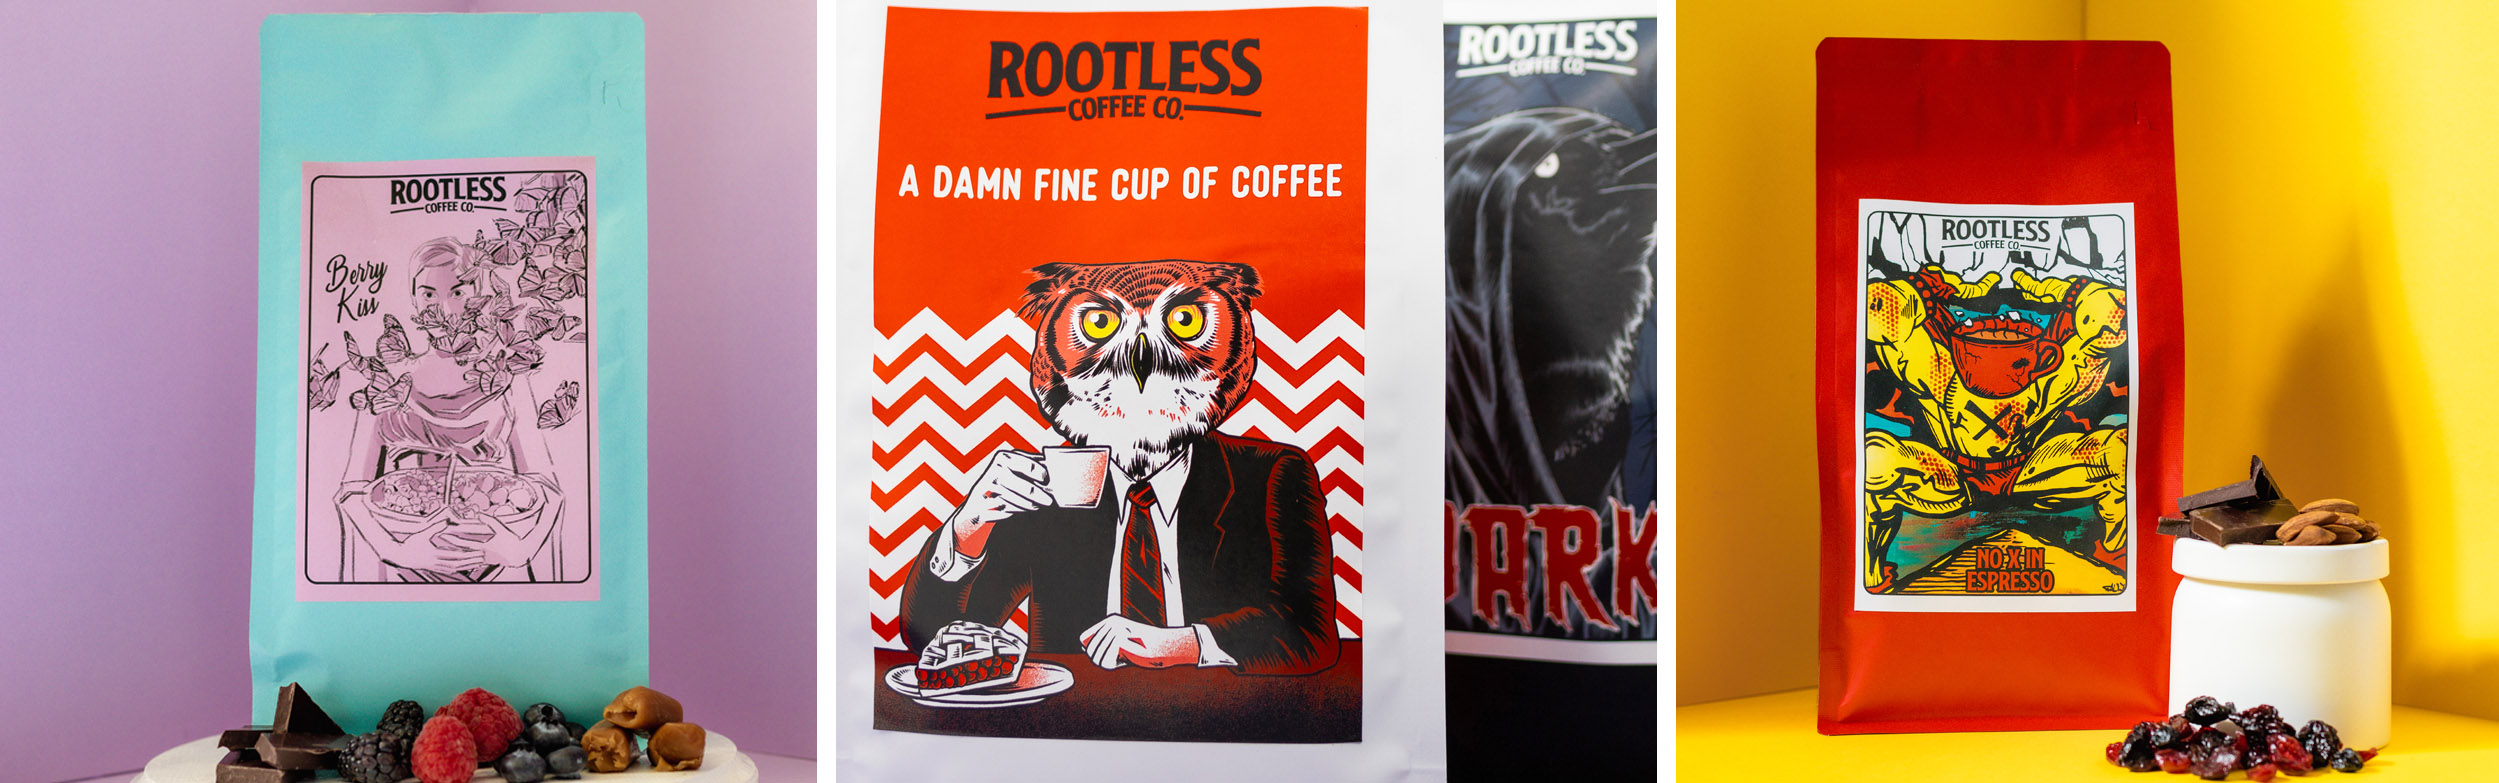 Four packages of various flavors of Rootless coffee.